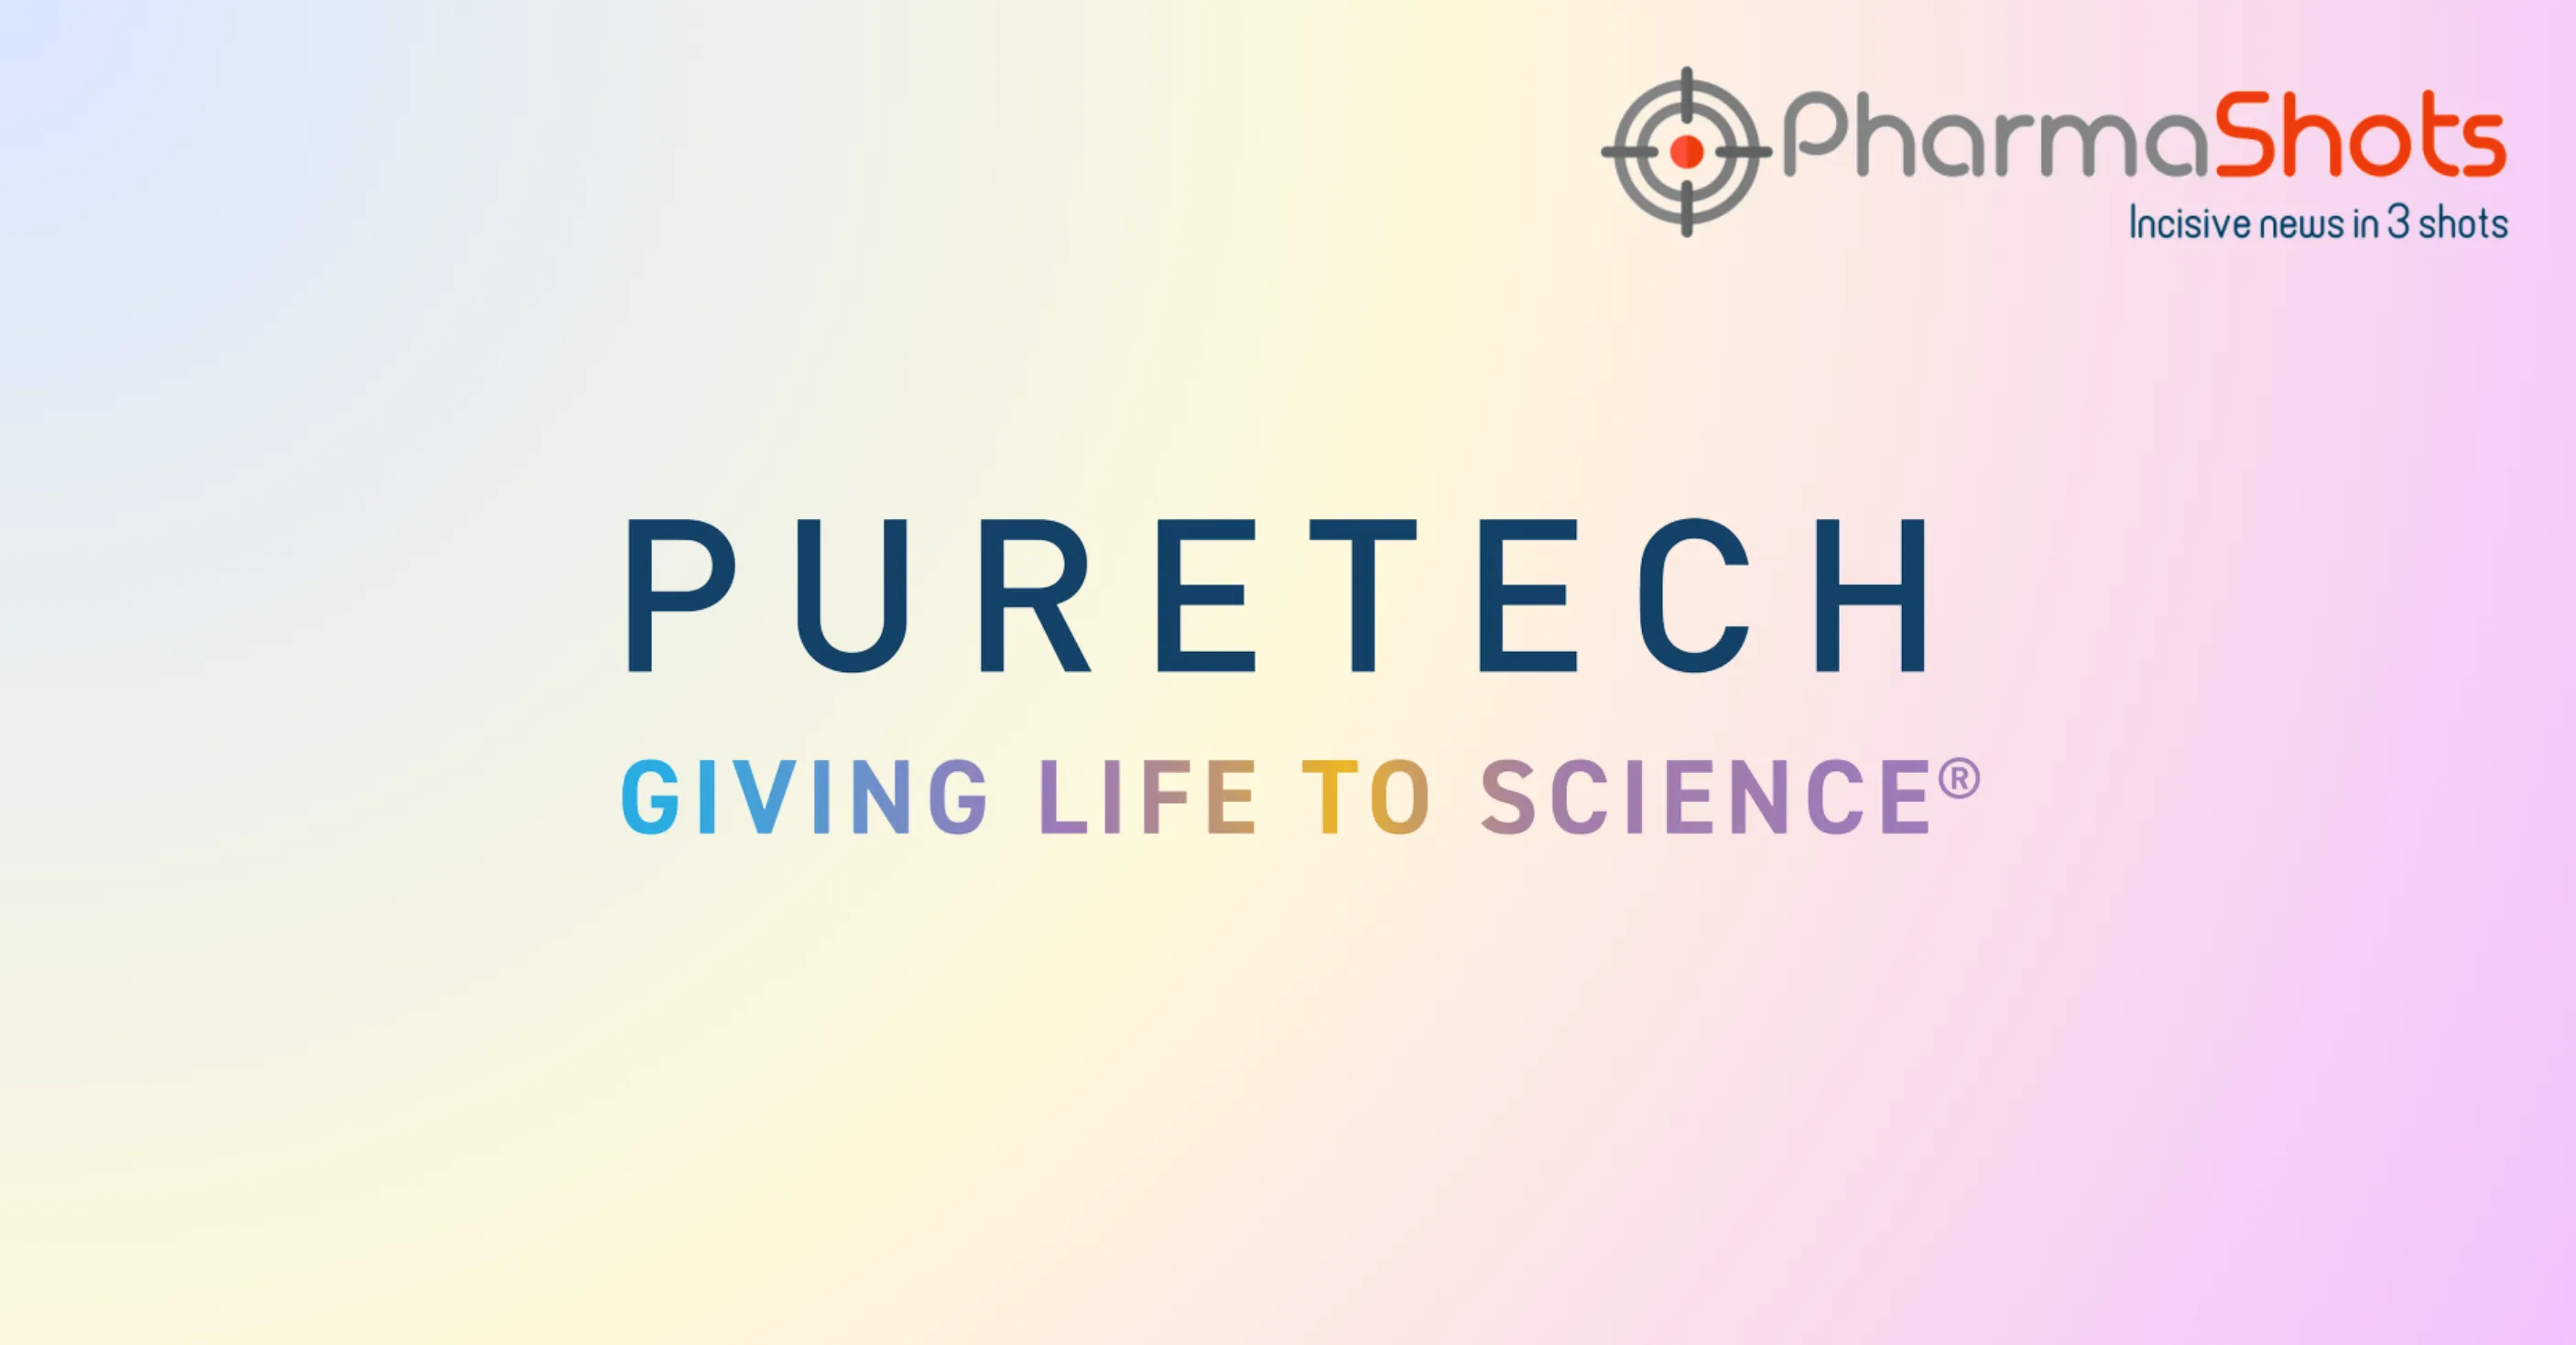 PureTech’s LYT-200 Gains the US FDA’s Fast Track Designation for Treating Head and Neck Cancers